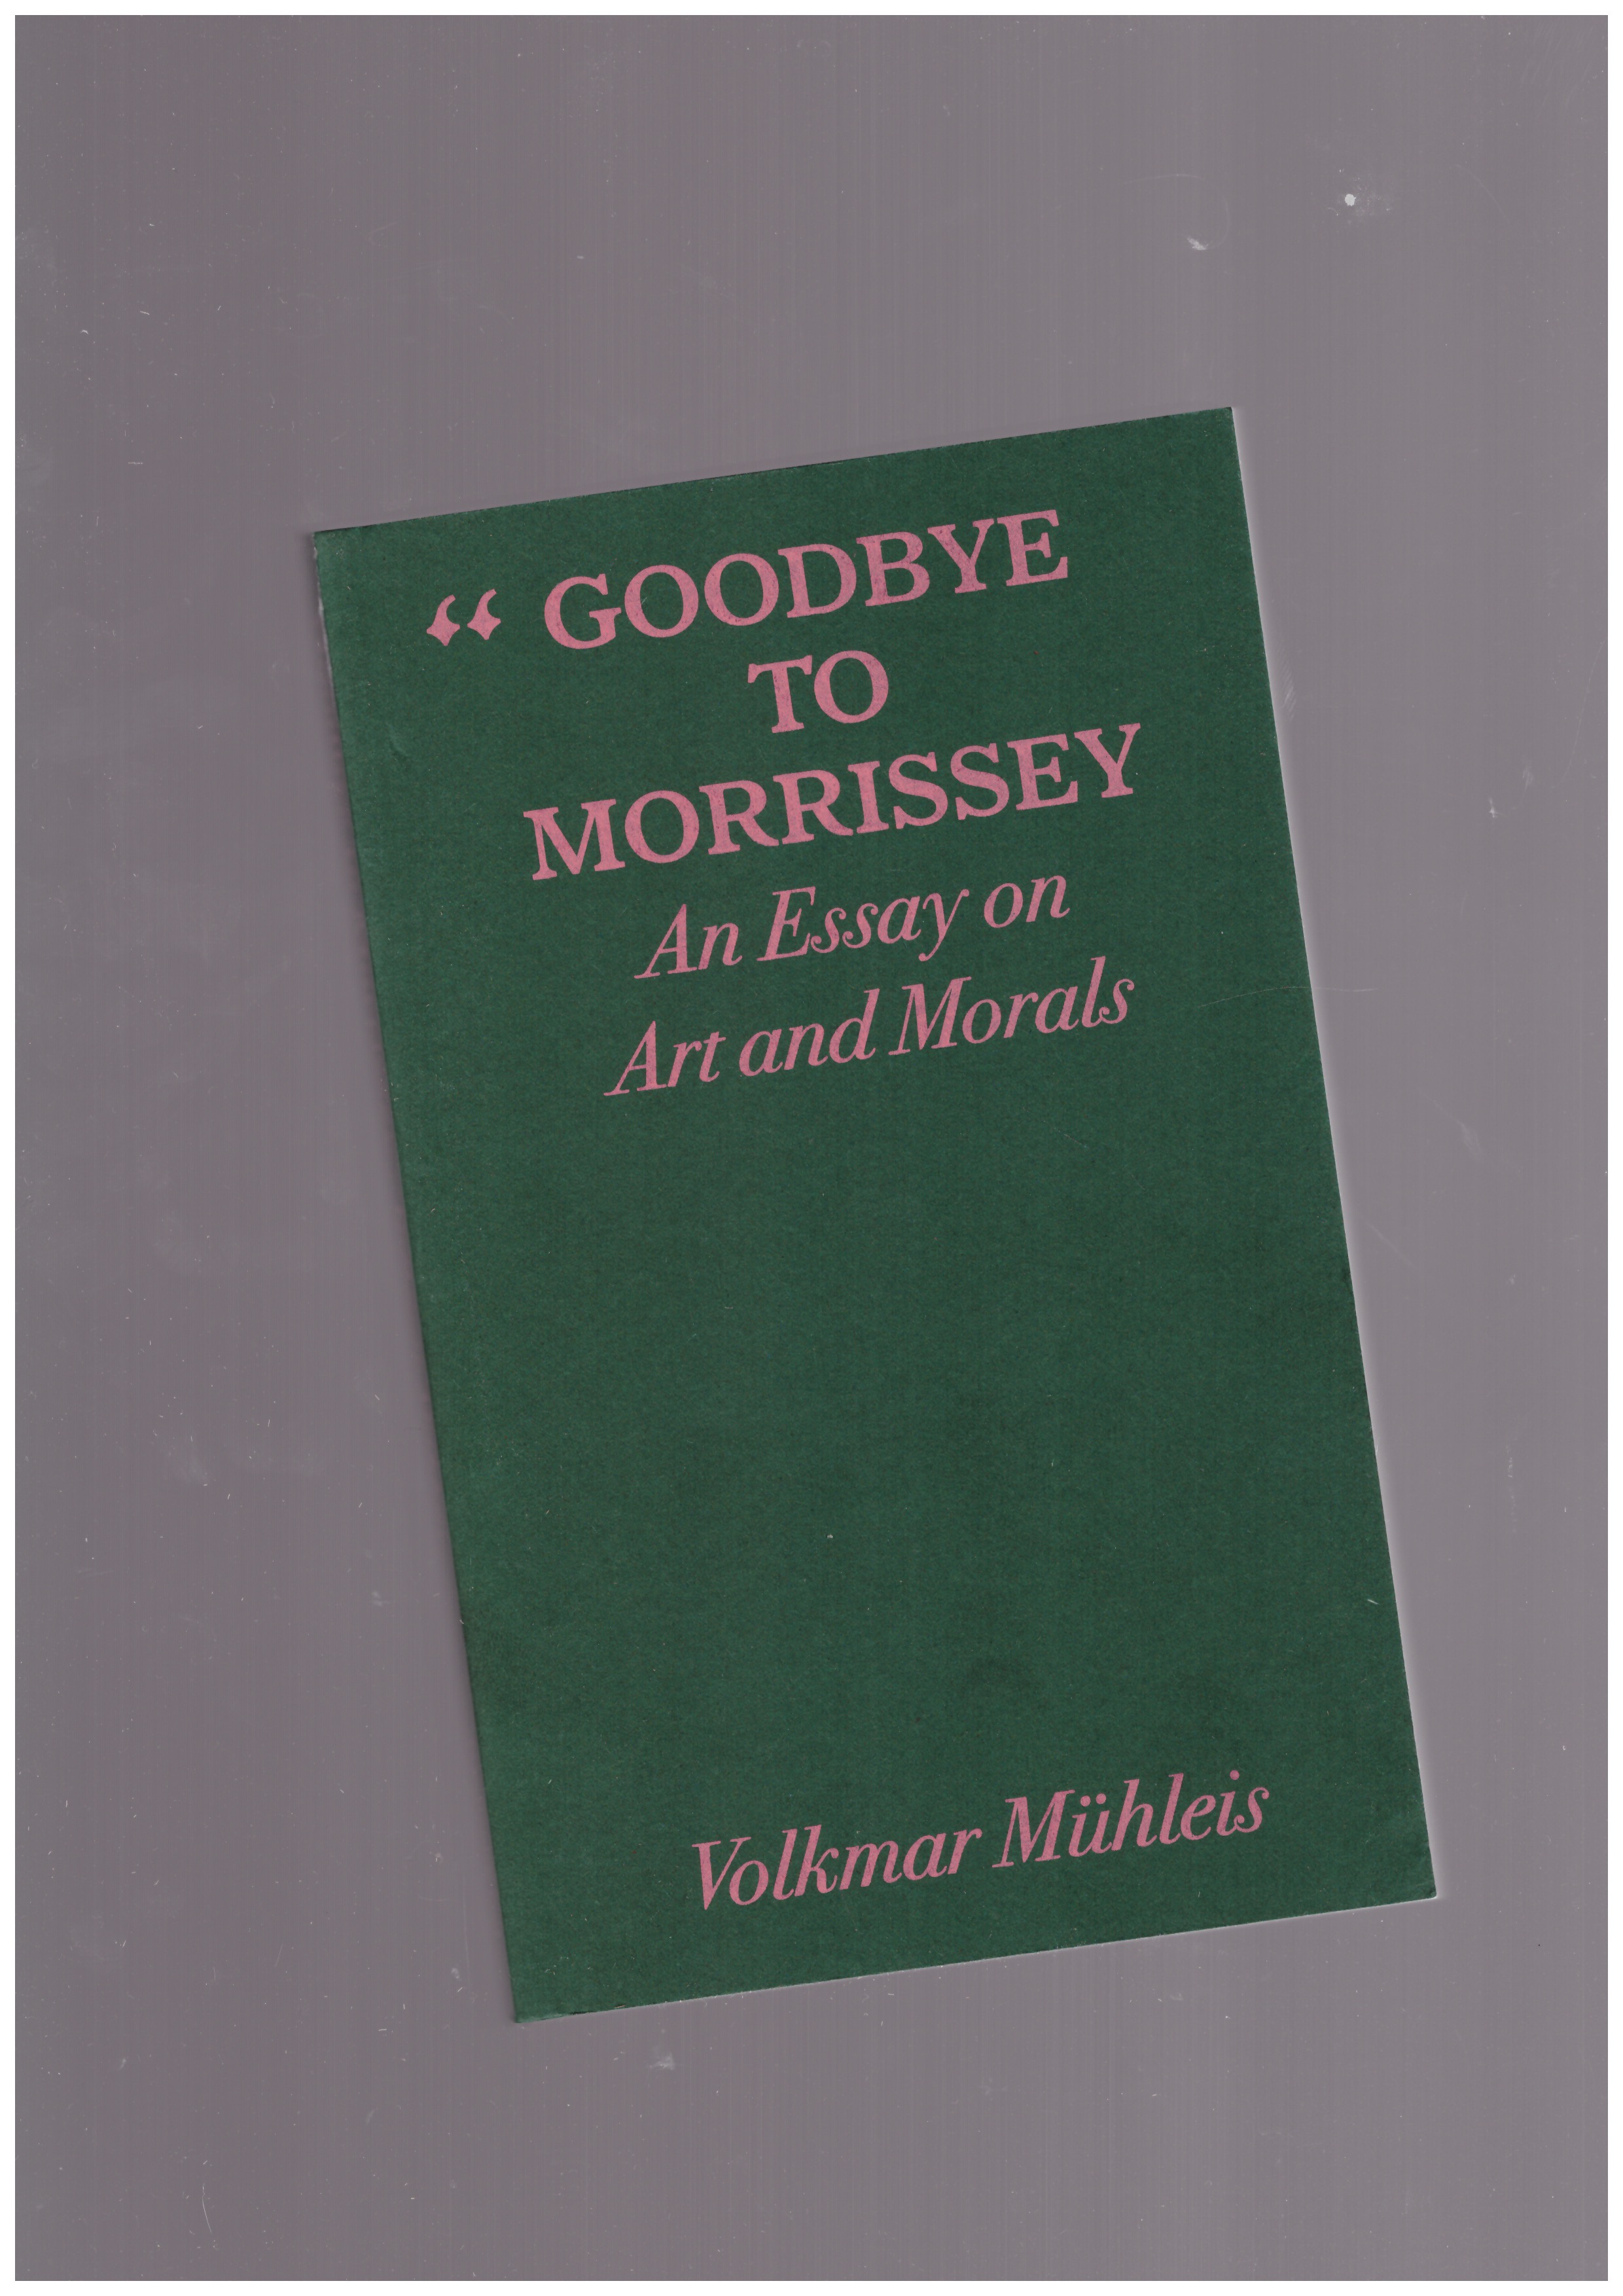 MÜHLEIS, Volkmar - Goodbye to Morissey - An Essay on Art and Morals